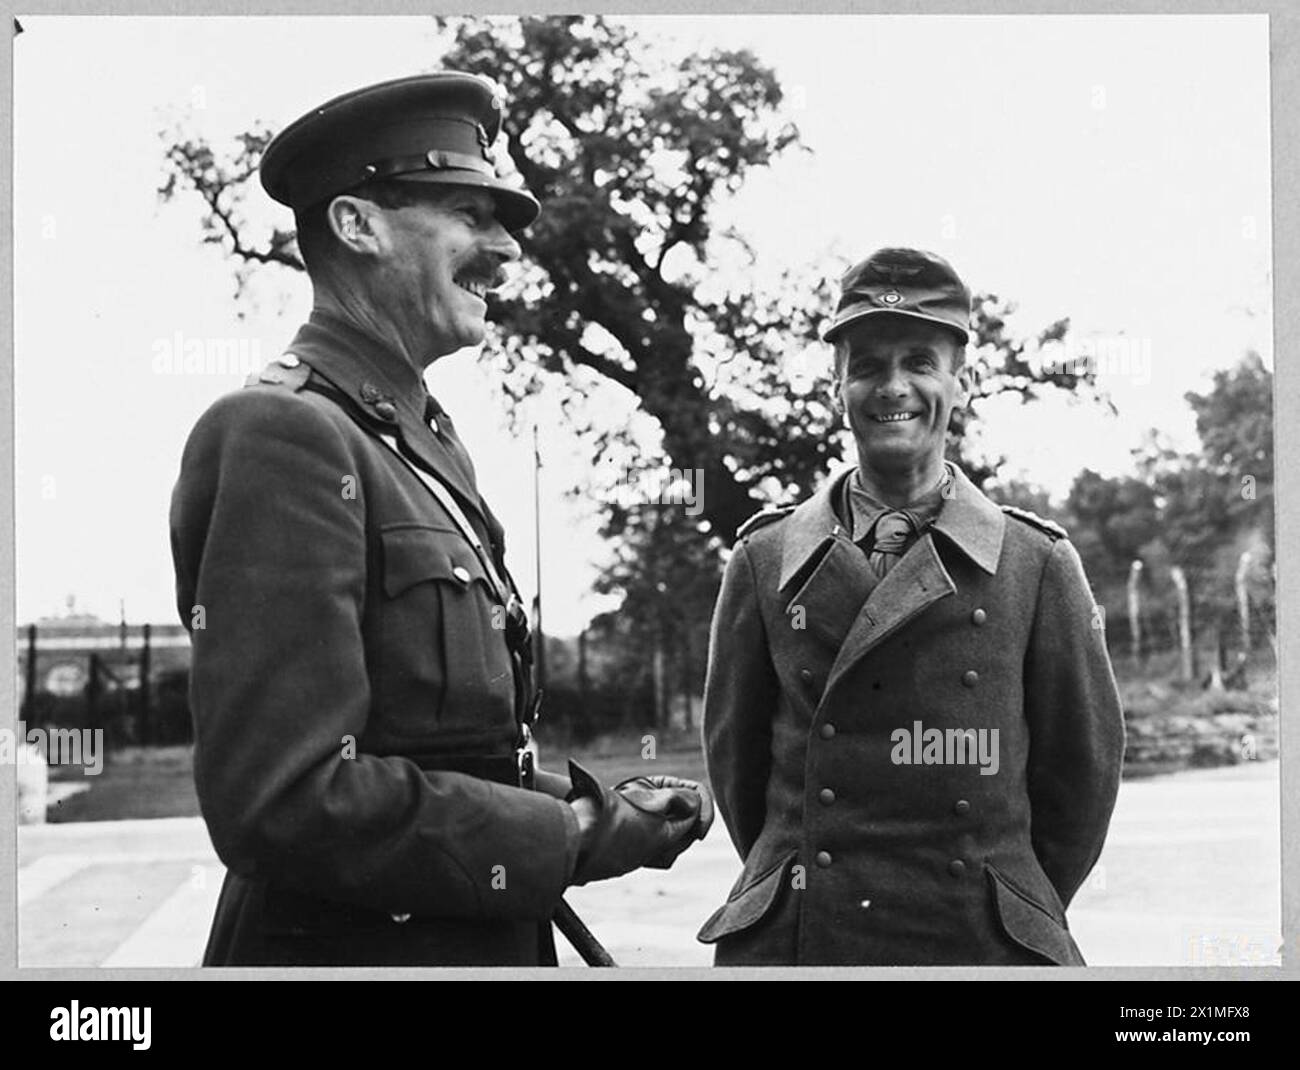 AXIS GENERALS ARRIVE IN SOUTH OF ENGLAND AS PRISONERS OF WAR. - 9958. Picture (issued 1943) shows - Colonel von Hulsen talking with the camp commandant before being conducted to join other senior German officers already in the camp, Royal Air Force Stock Photo